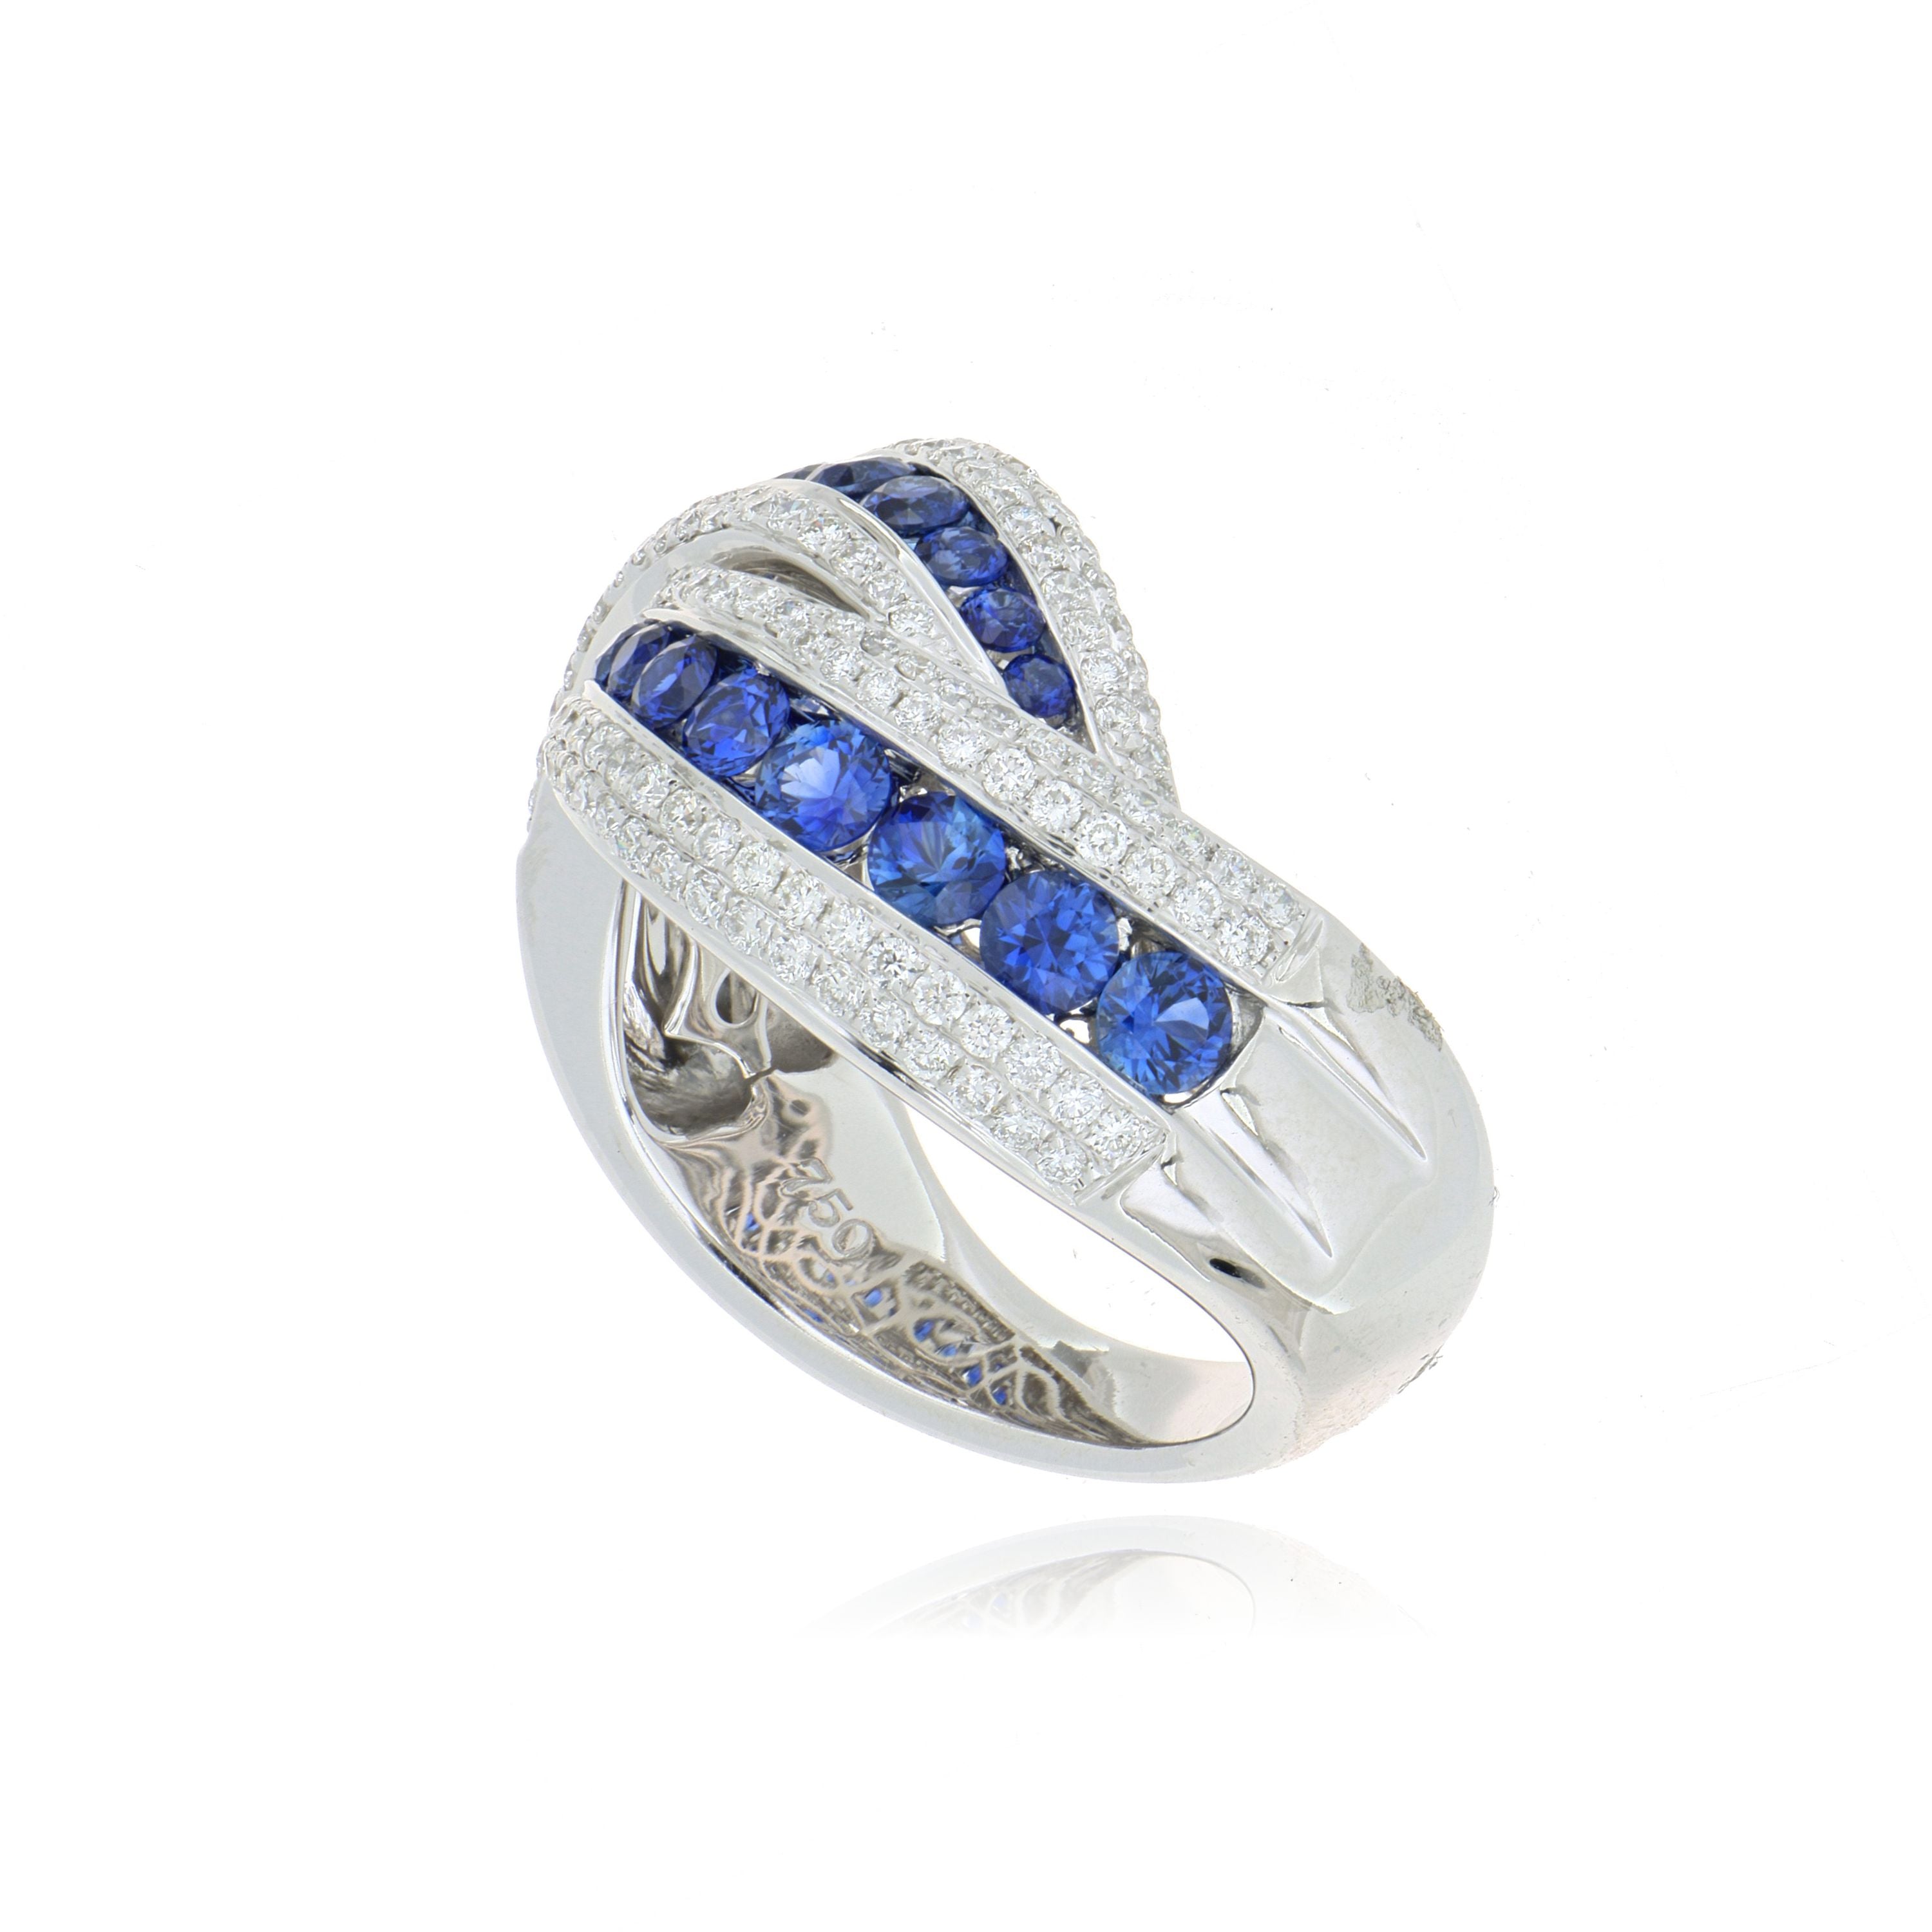 18k White Gold Diamond and Blue Sapphire Ring